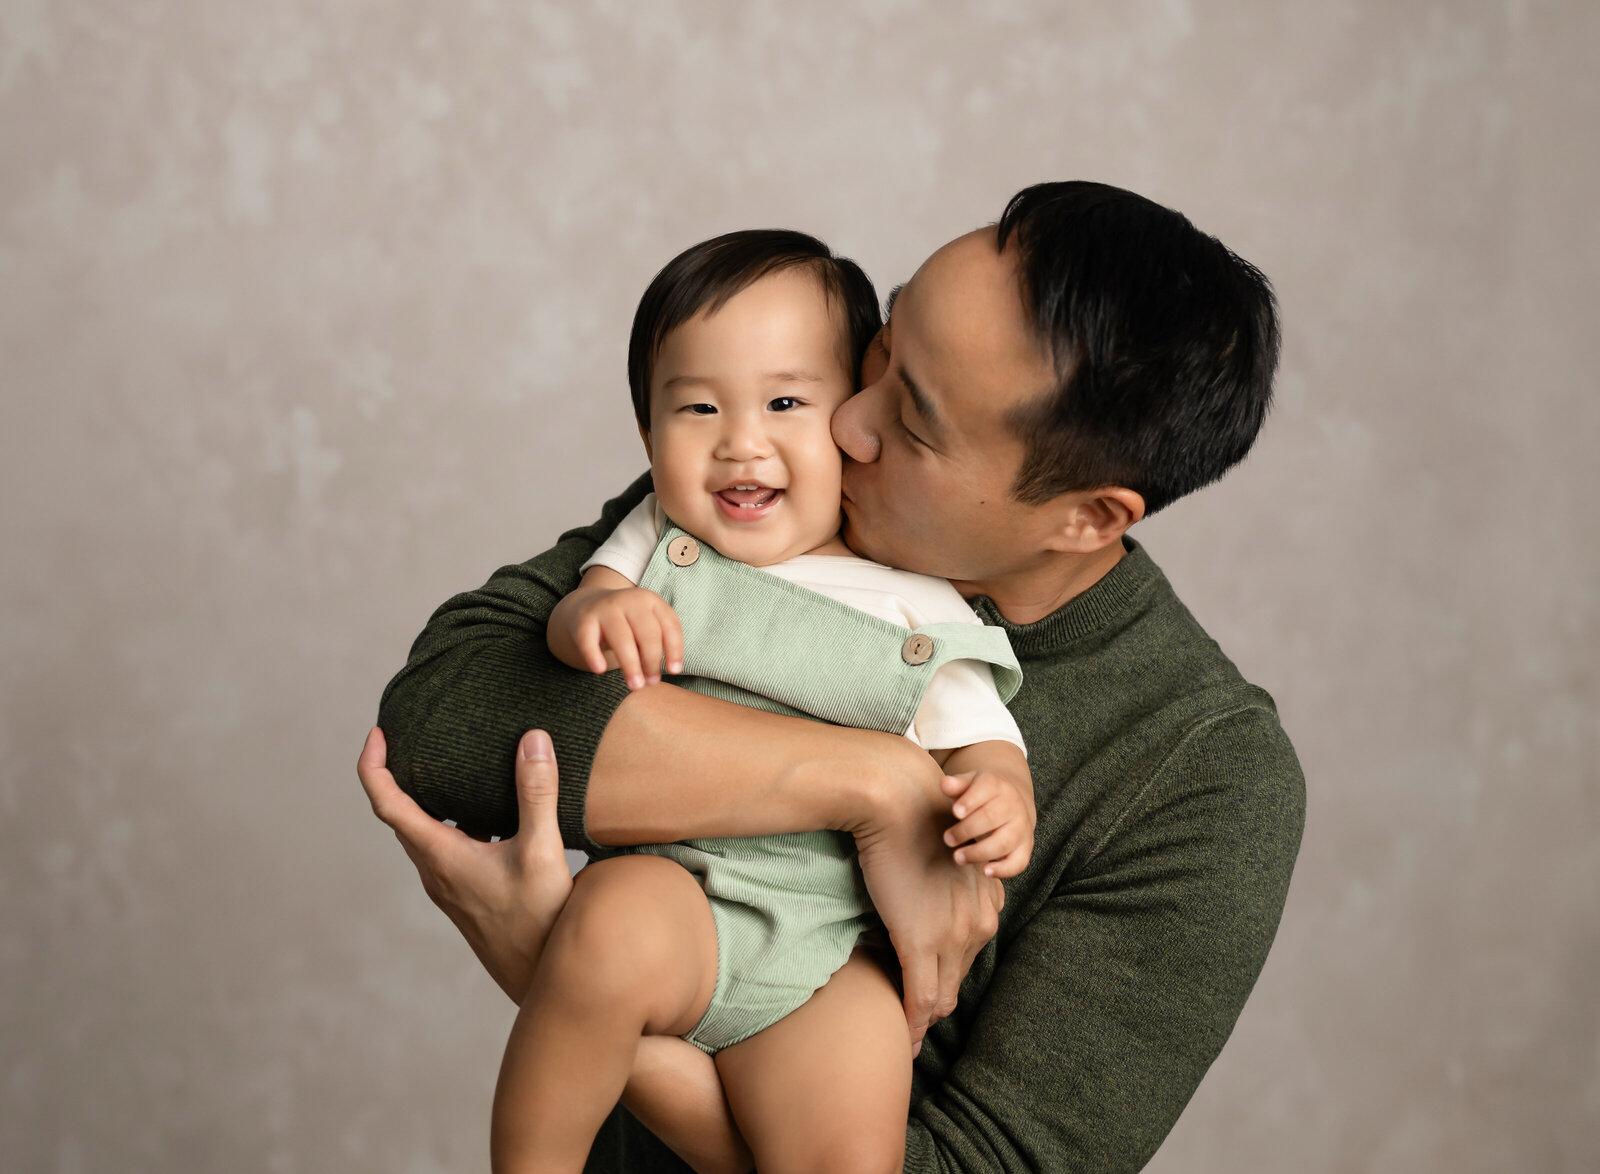 what to wear for family photoshoot in studio